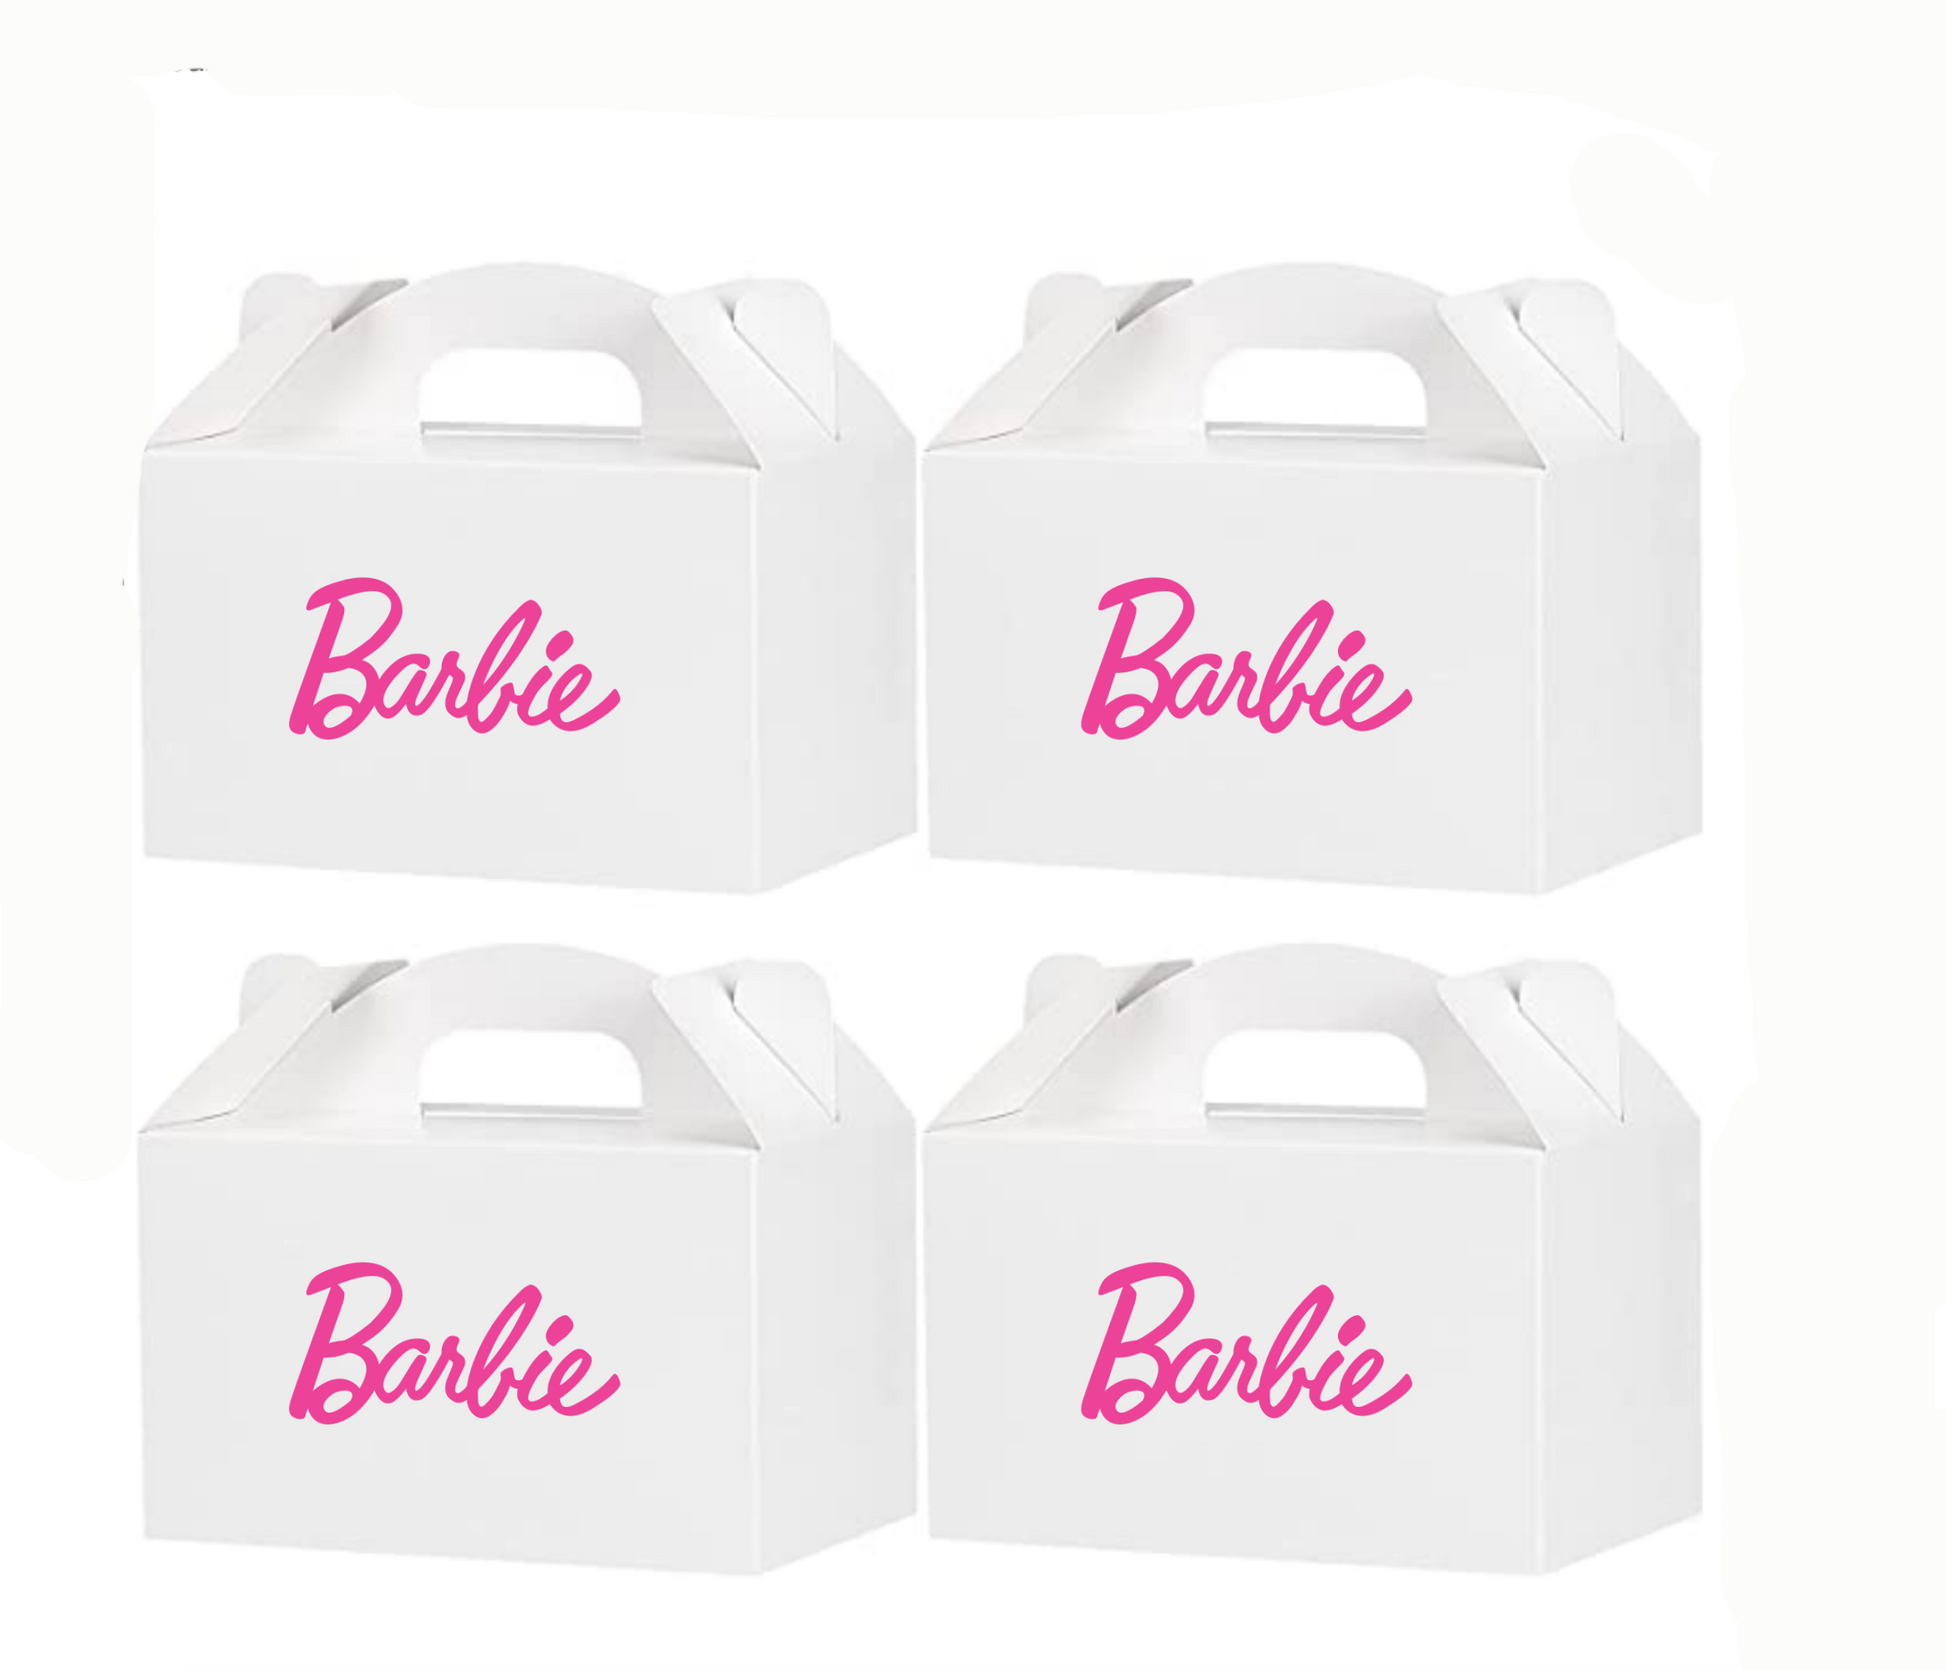 Barbie Cardstock Box ,Fabric Bags, Party Favor, Girl Gift, Decoration, Candy Bag, Tableware